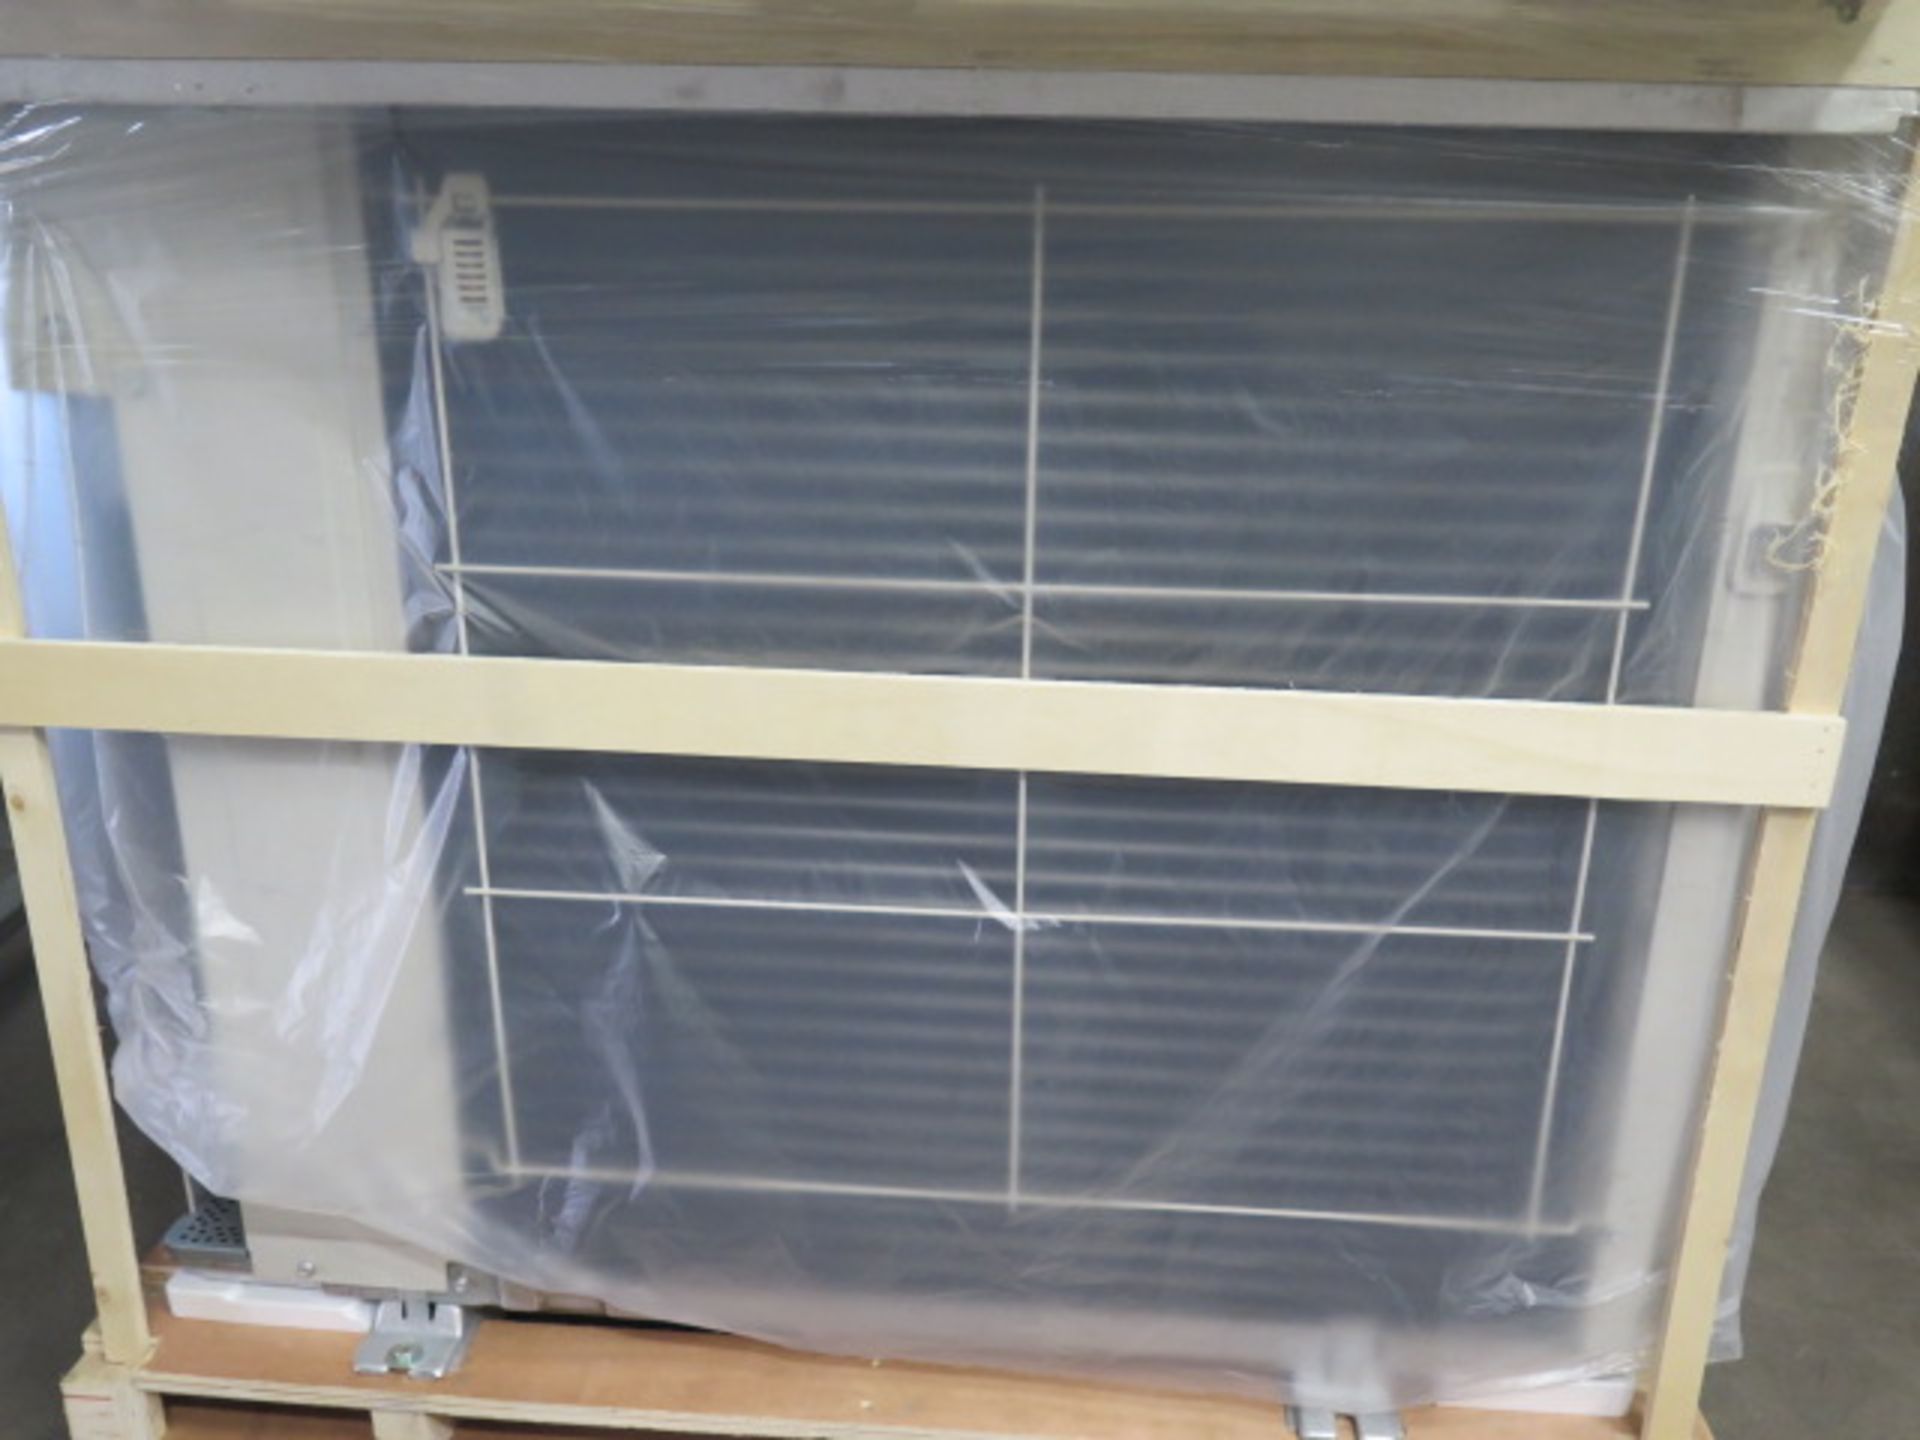 Mitsubishi MXZ-3C24NA Multiport Heat Pump Air Conditioner w/ PLA-A24BA6 Ceiling Cassette - Image 3 of 6